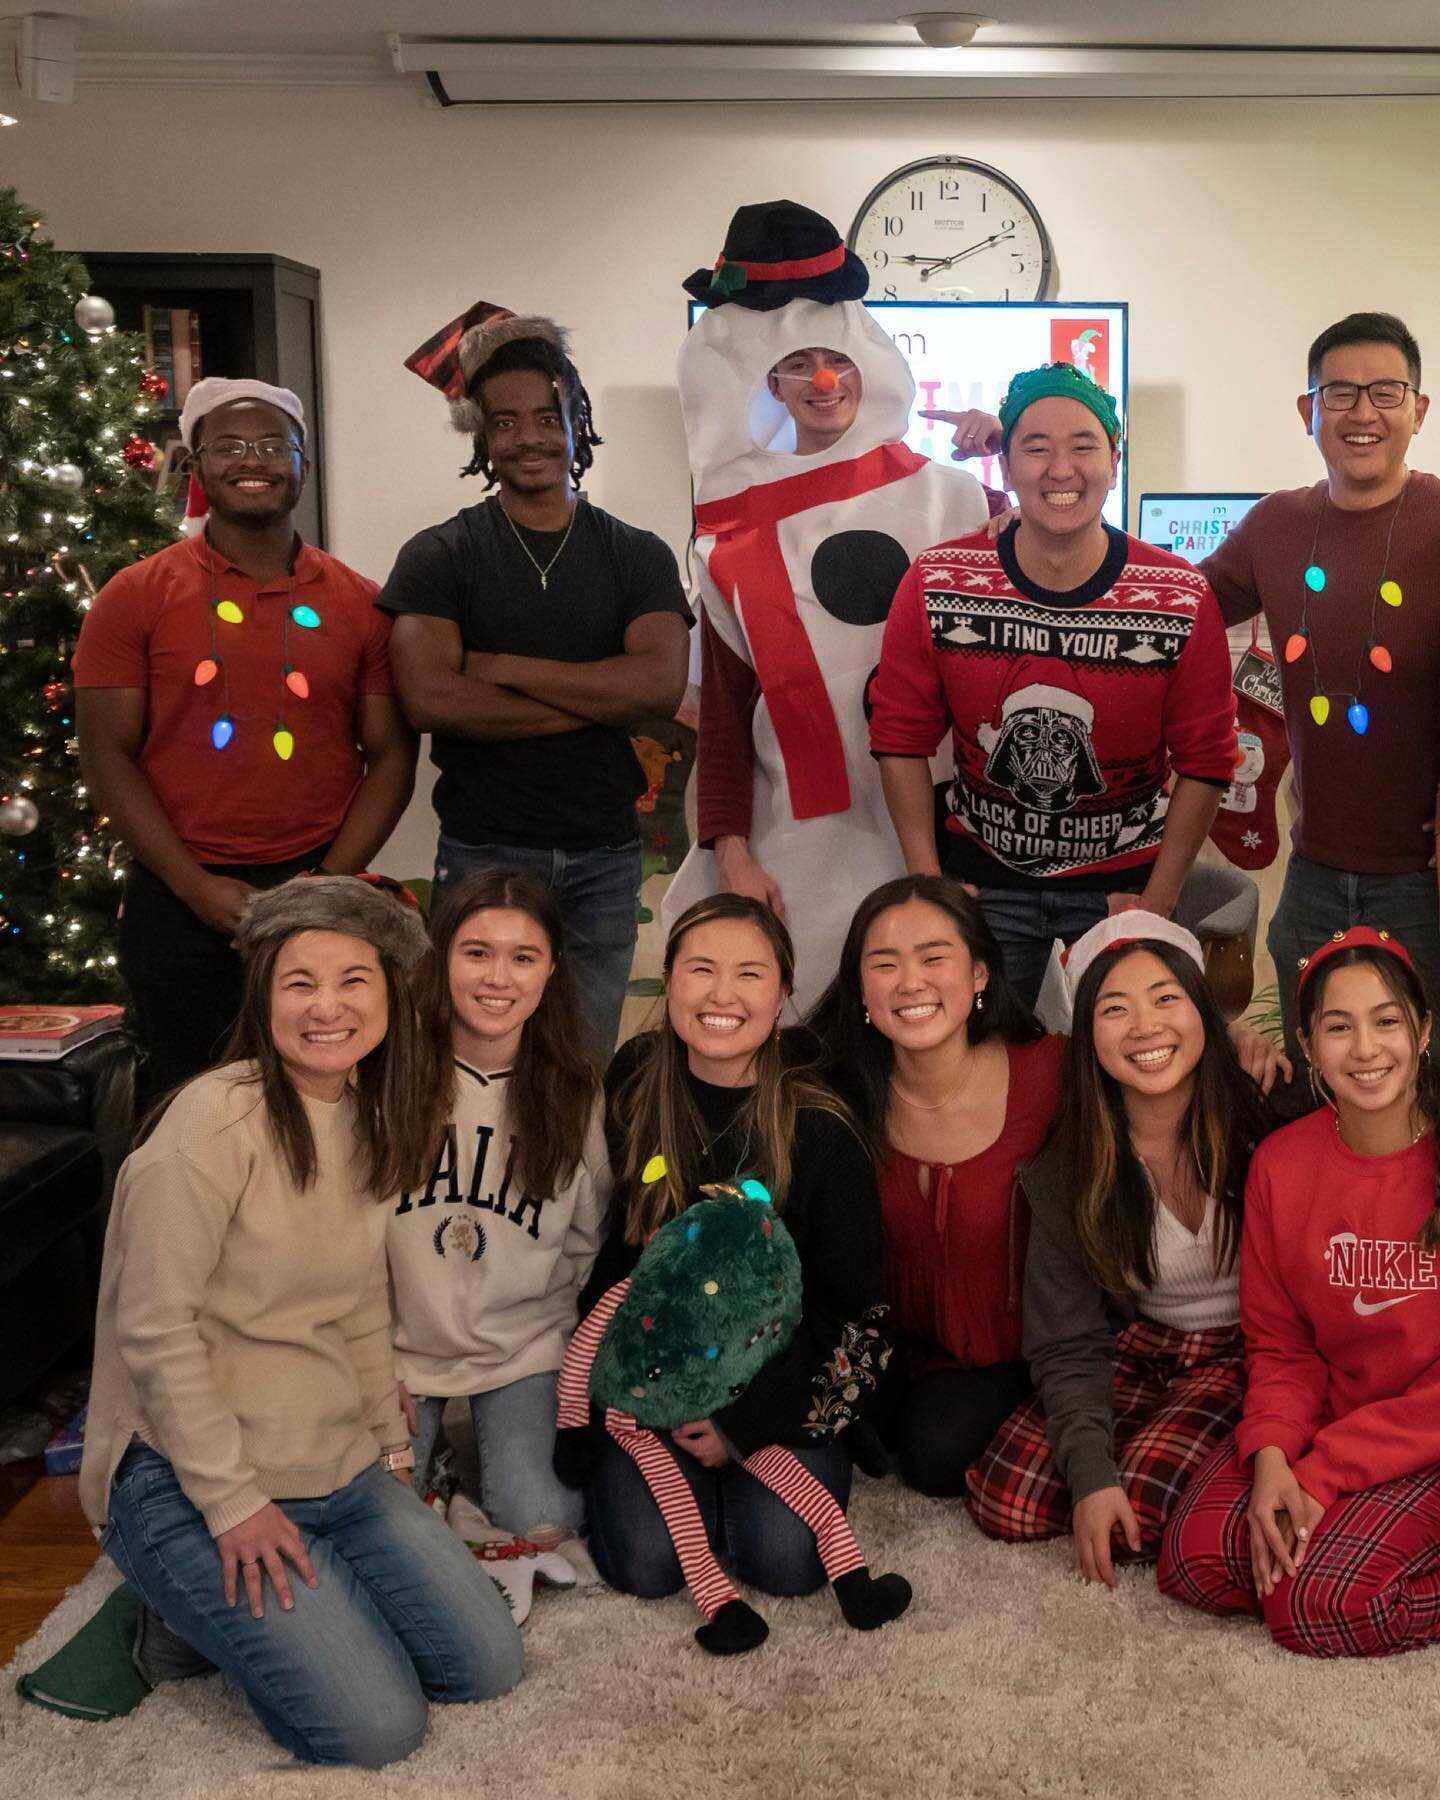 Merry Christmas!🎄

We have to share highlights from our annual moment Christmas party. ➡️➡️➡️Swipe to the end for an exciting telephone charades ⛸️😂

#jesusisthereasonfortheseason